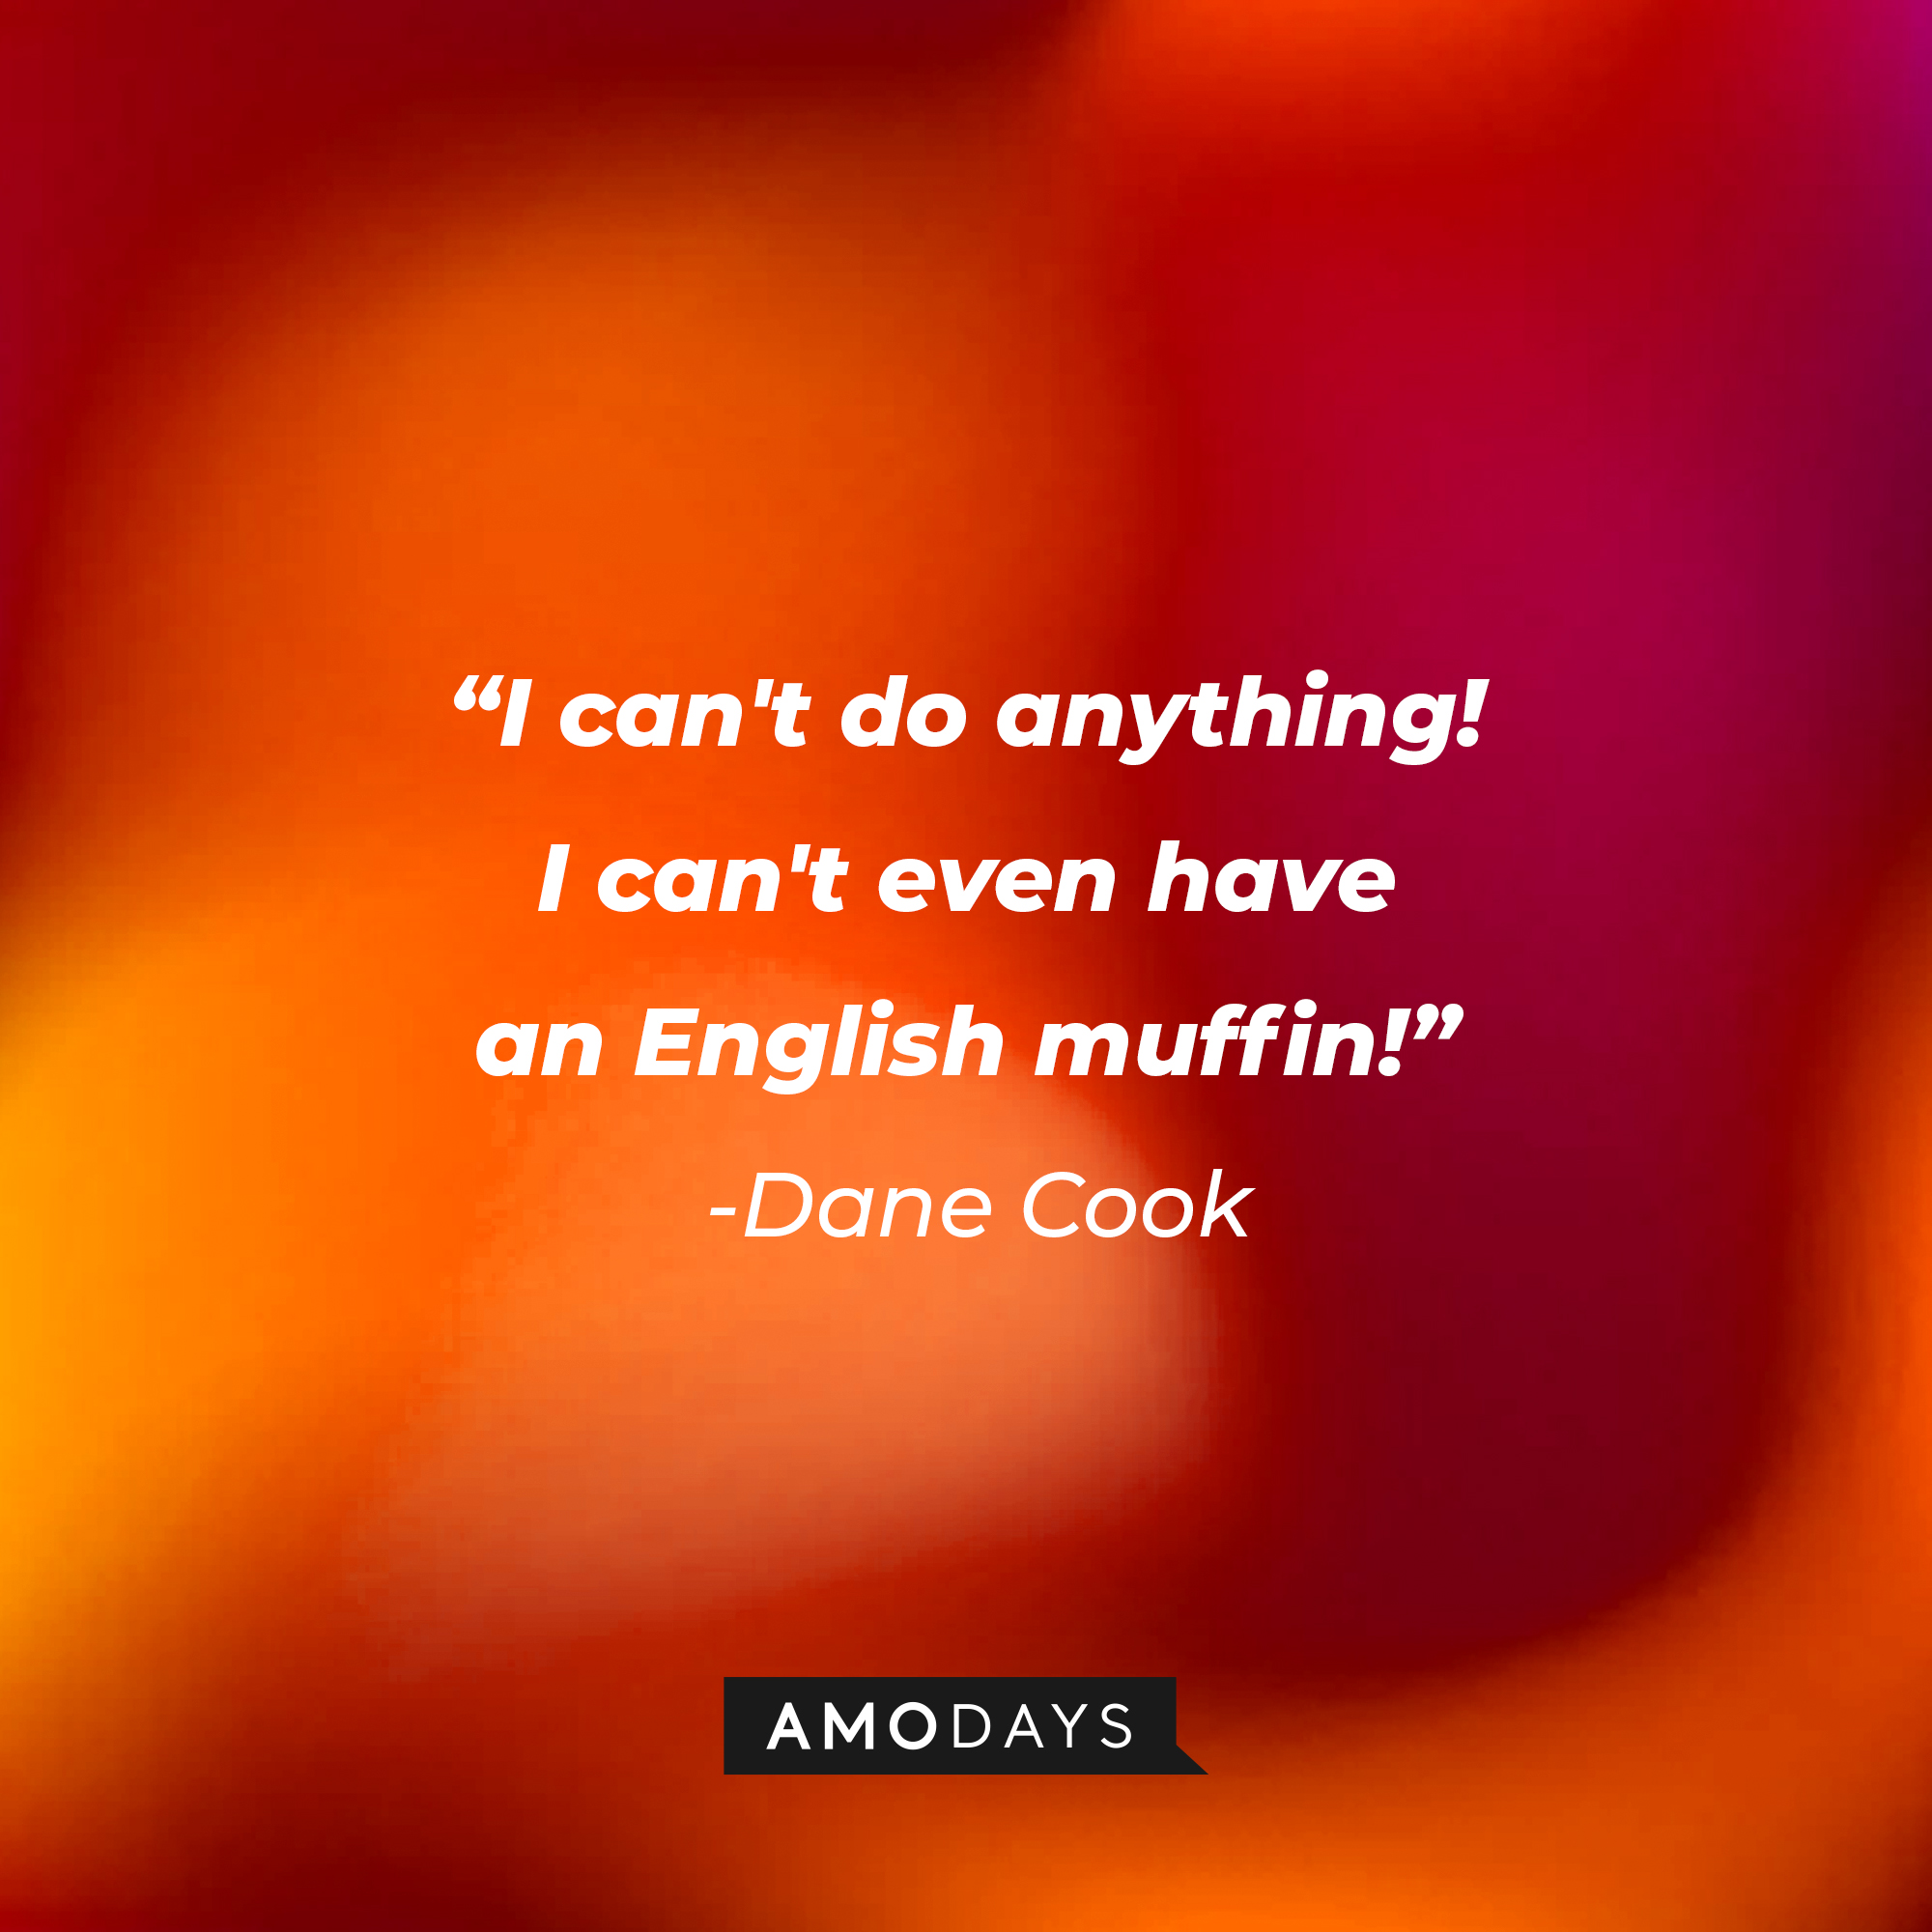 Dane Cook's quote: “I can't do anything! I can't even have an English muffin!” | Source: Amodays